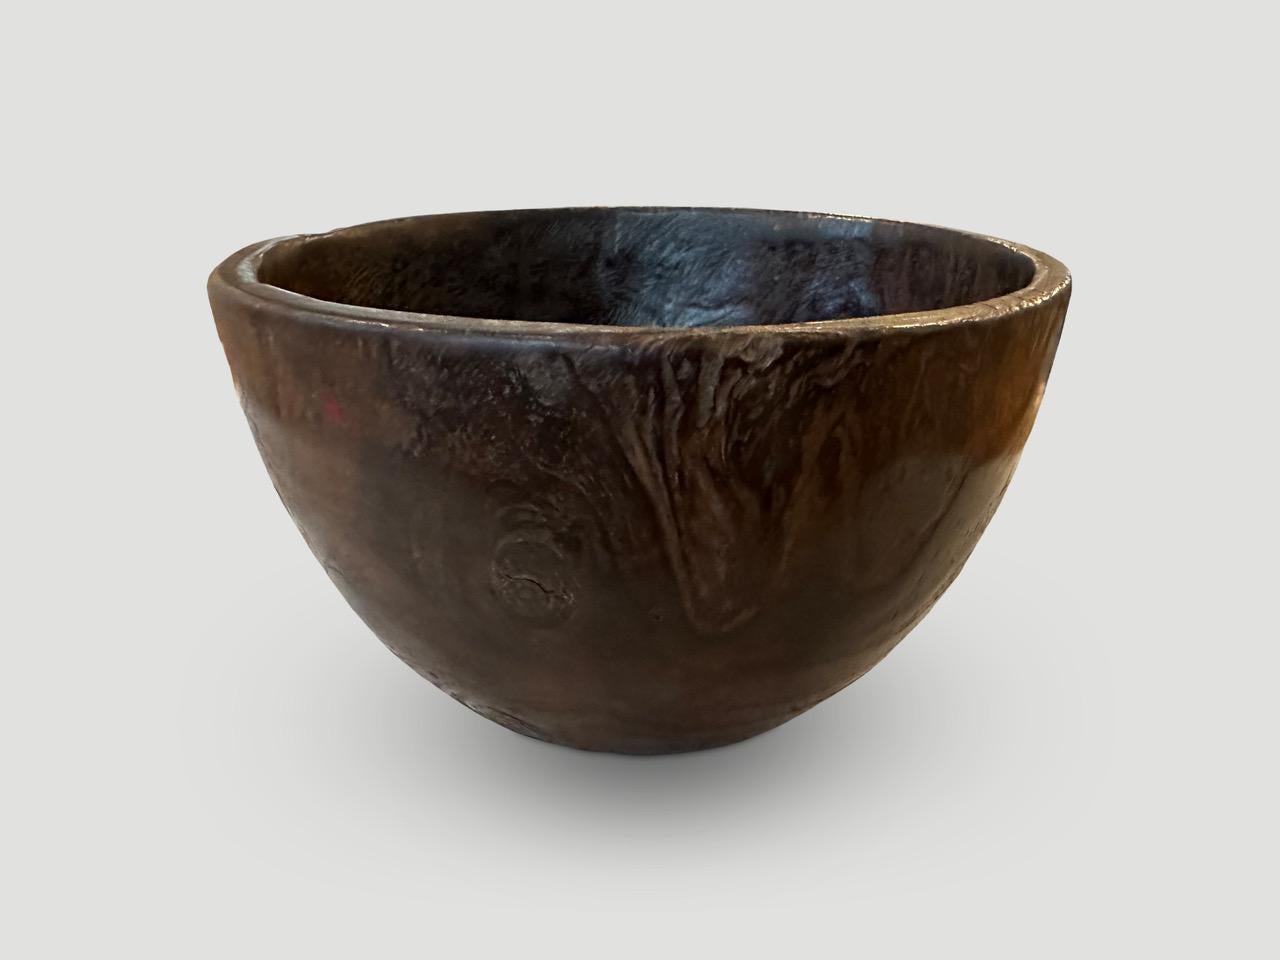 Beautiful antique bowl hand carved from a single piece of teak wood.

This bowl was sourced in the spirit of Wabi-Sabi, a Japanese philosophy that beauty can be found in imperfection and impermanence. It is a beauty of things modest and humble. A